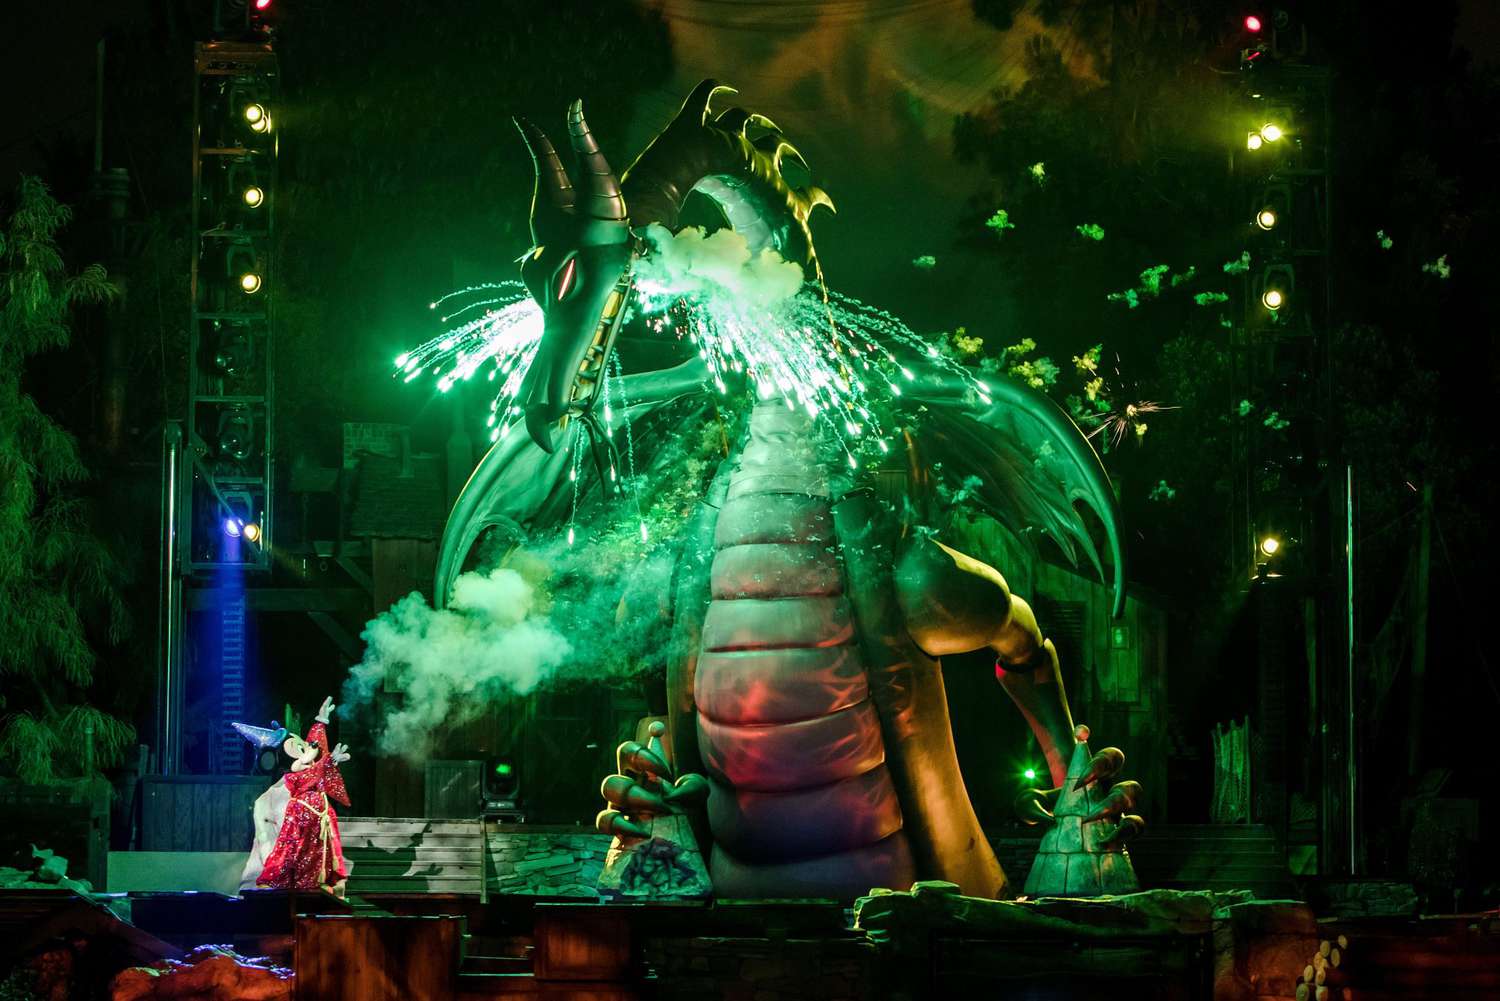 Fantasmic!, a “must-see” show at Disneyland Park for nearly 30 years, returns on May 28, 2022. Disney’s longest-running nighttime spectacular is an emotional extravaganza of colorful Disney animated film images, choreographed to an exciting musical score. The waters of the Rivers of America come alive as Mickey Mouse’s power of imagination enables him to create fantastic events and images as seen in beloved Disney classic films like “Fantasia,” “The Jungle Book,” “The Little Mermaid” and more. Guests can visit Disneyland.com and the Disneyland app for the latest details. (Joshua Sudock/Disneyland Resort)